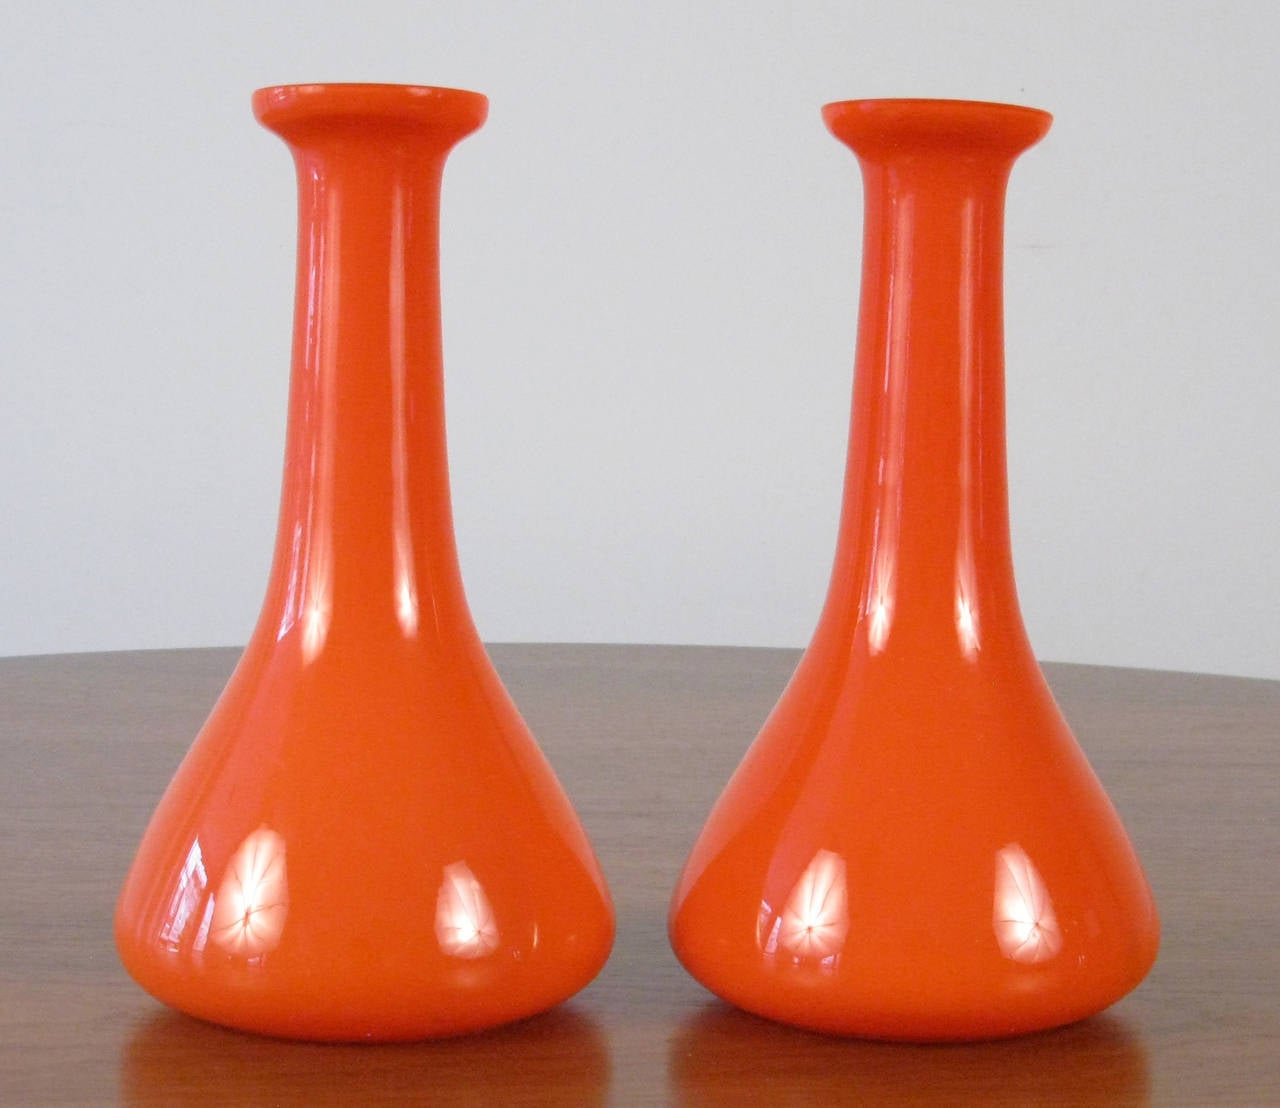 I just like these blown glass bud vases because of their orange color and they look like the Gemini space capsules. Partial label.